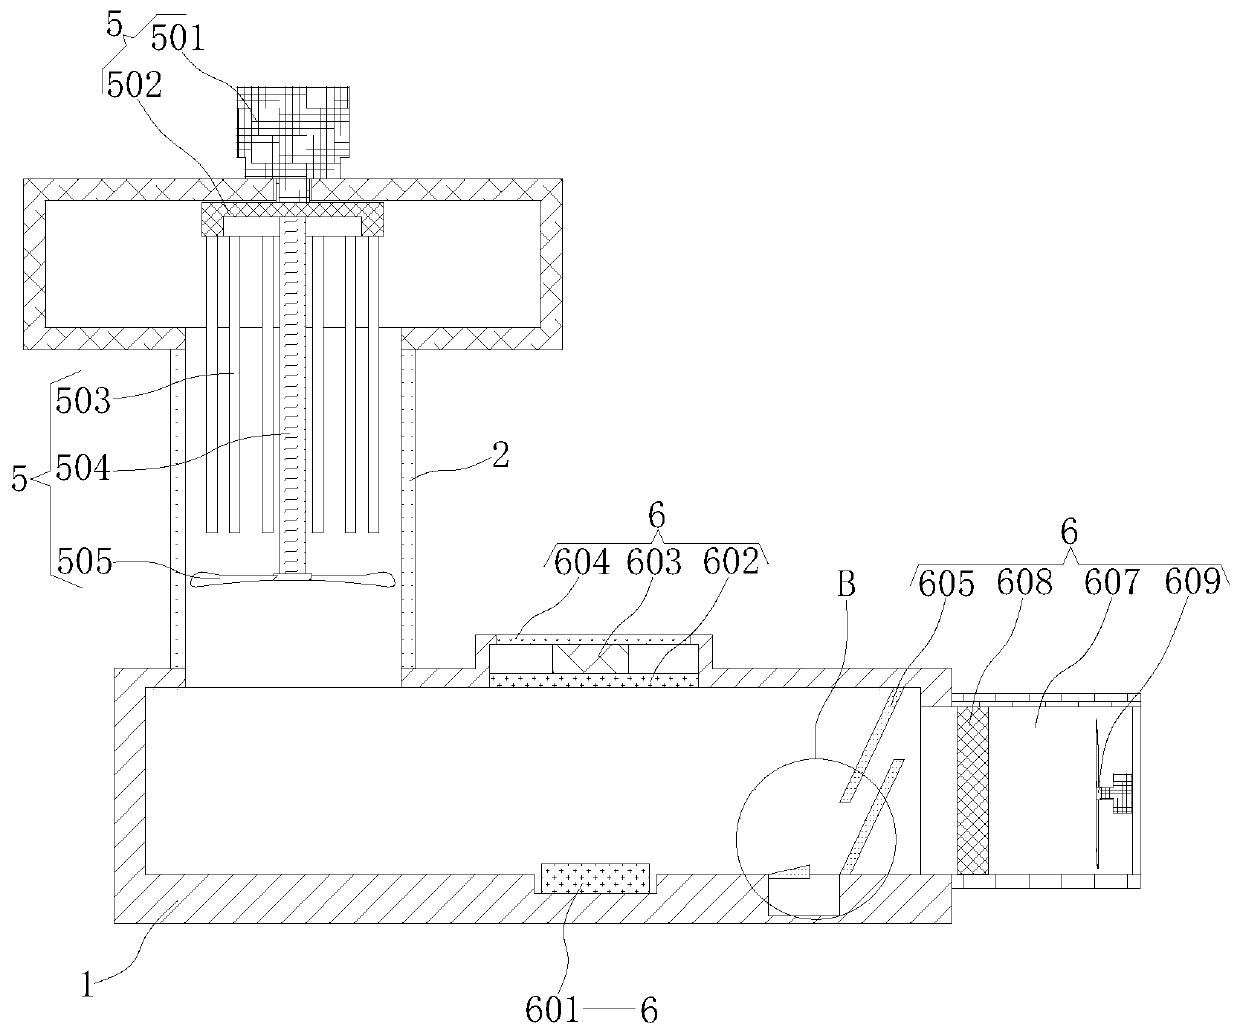 Air dust monitoring method for environmental supervision